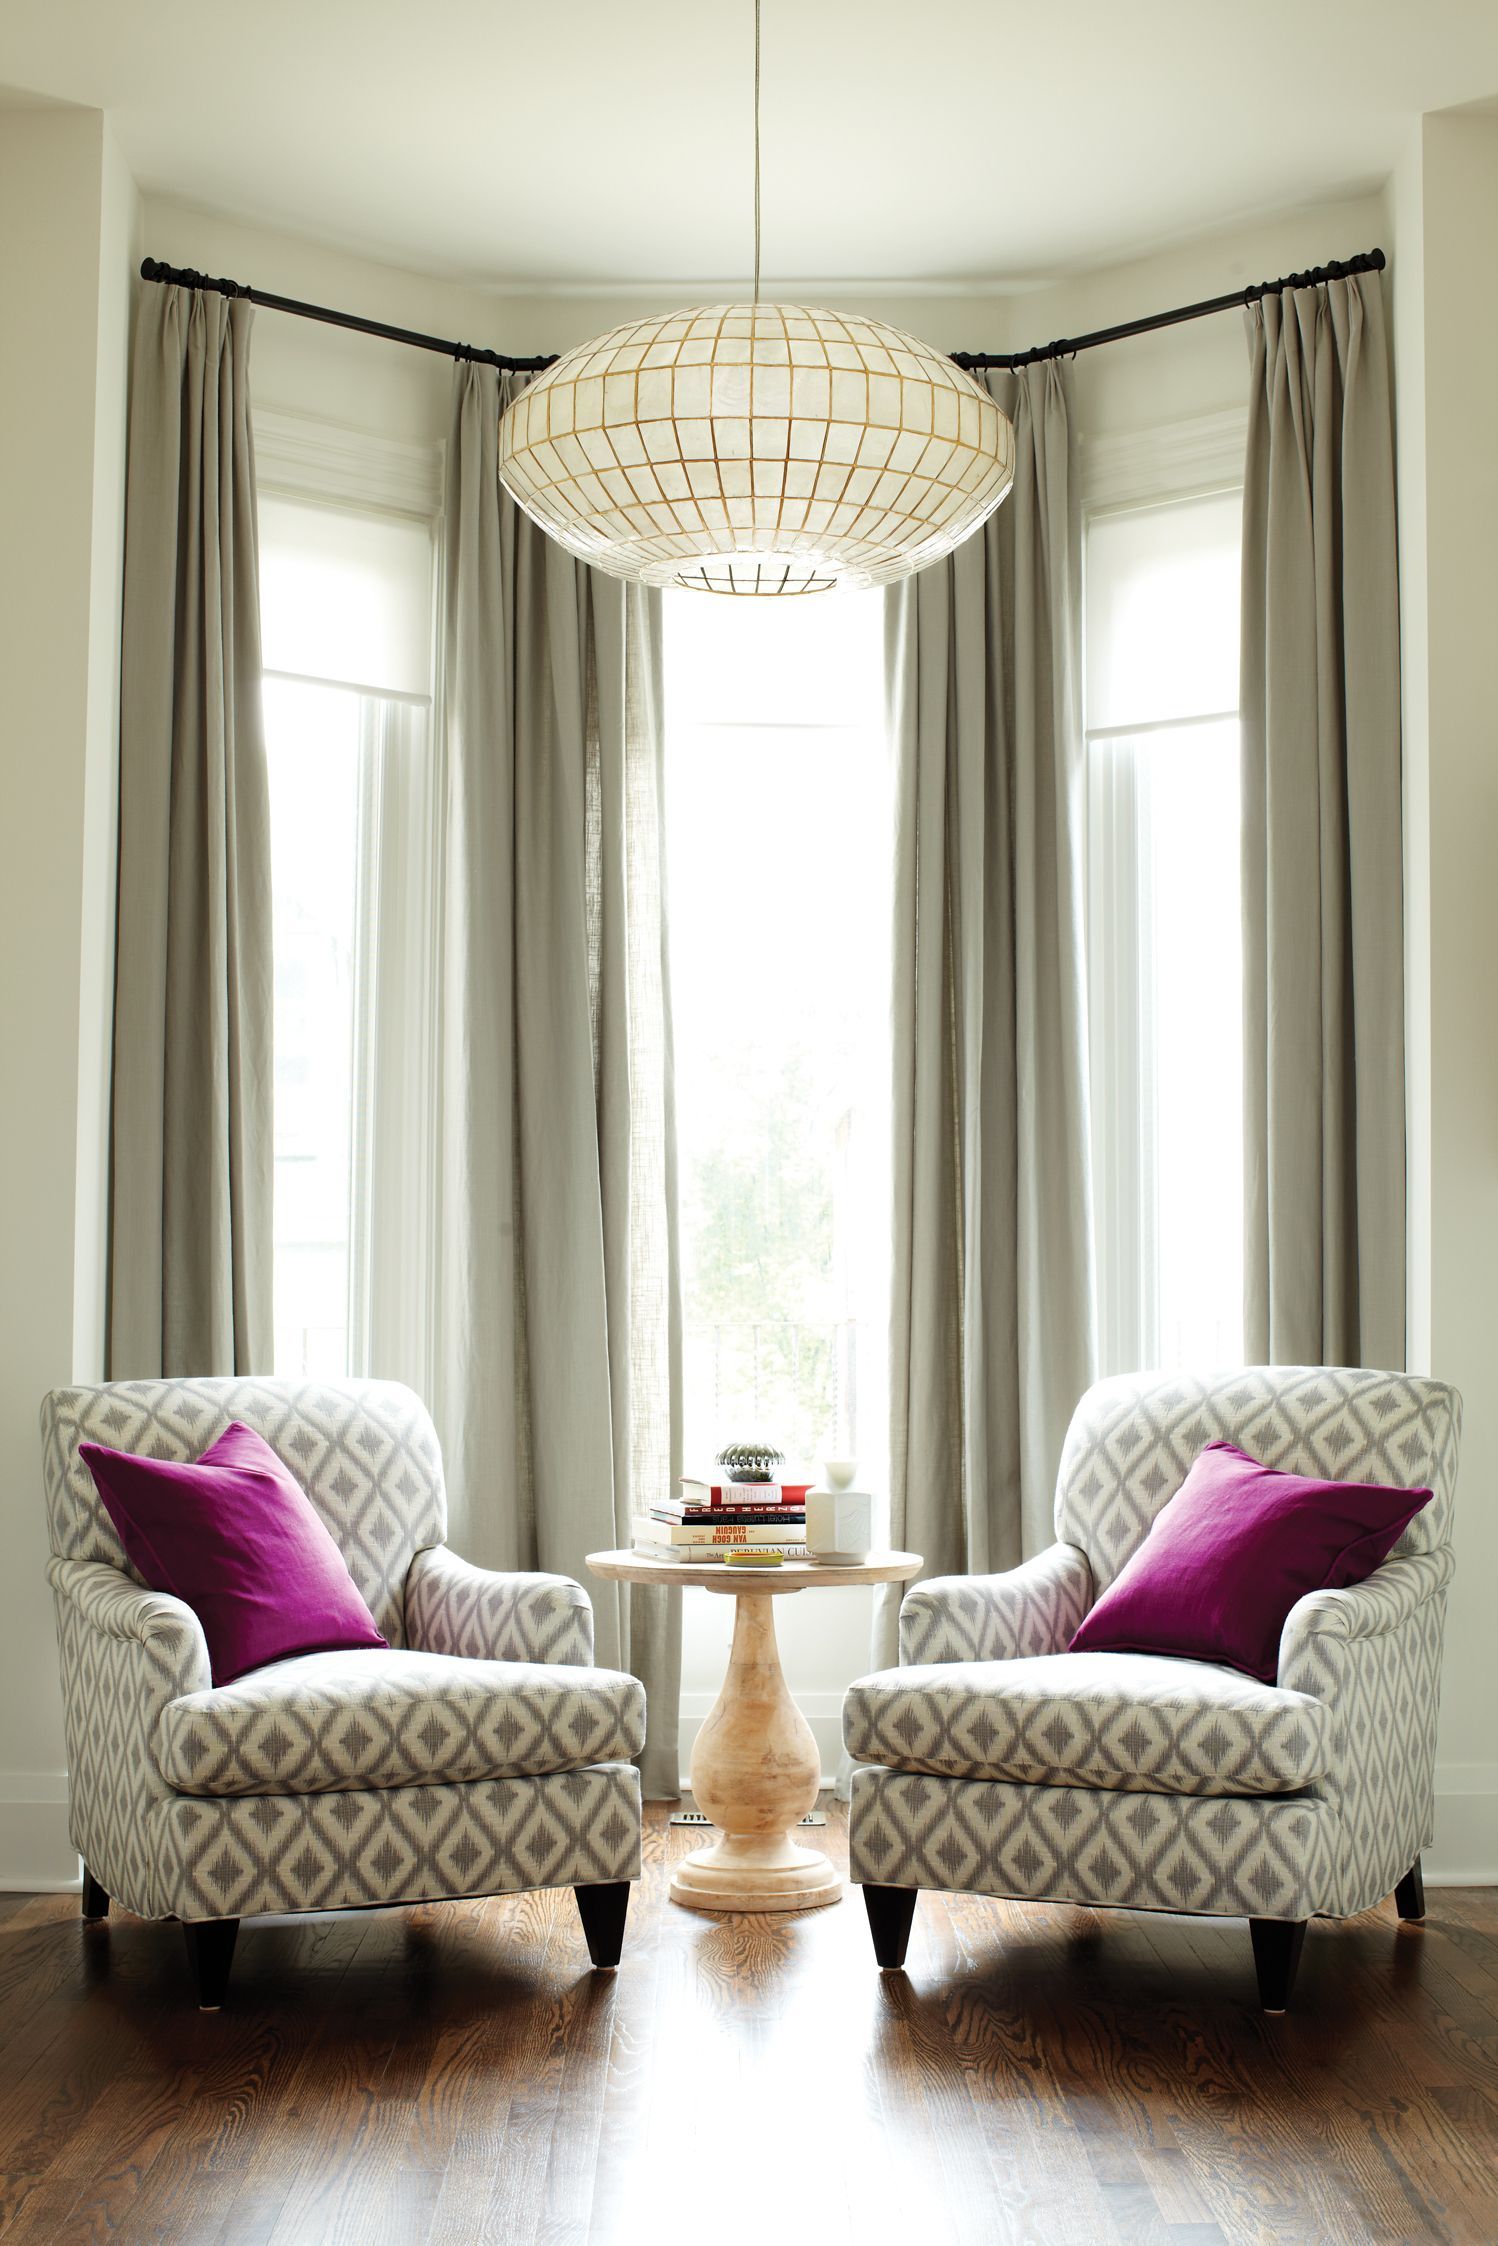 How to make the room look bigger: Living room, two armchairs, large chandelier,